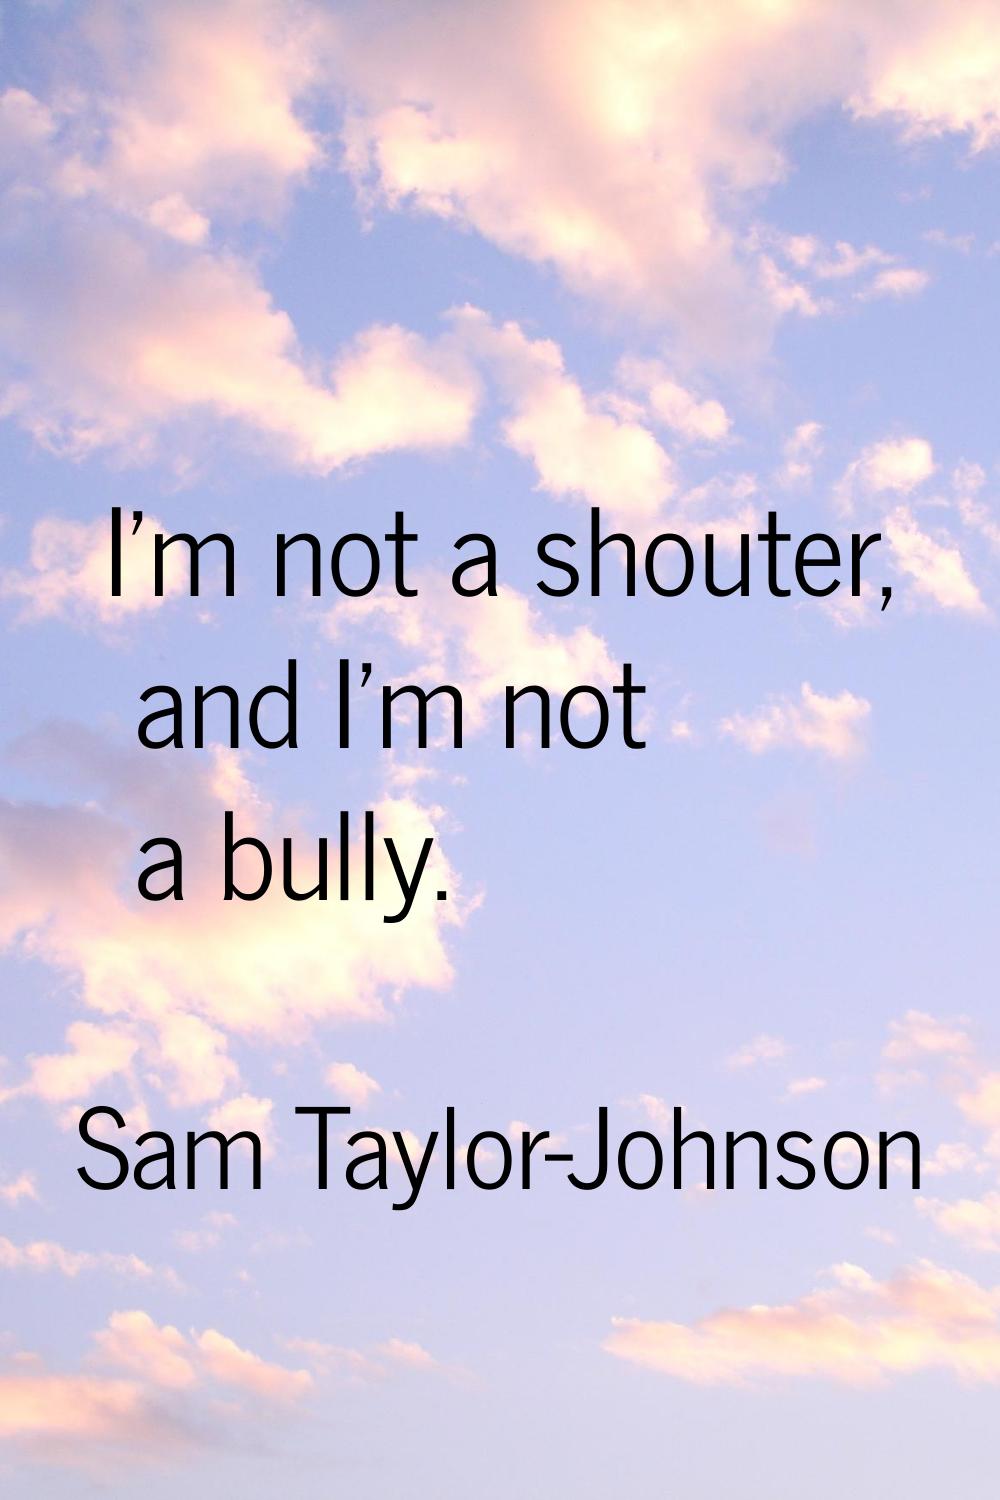 I'm not a shouter, and I'm not a bully.